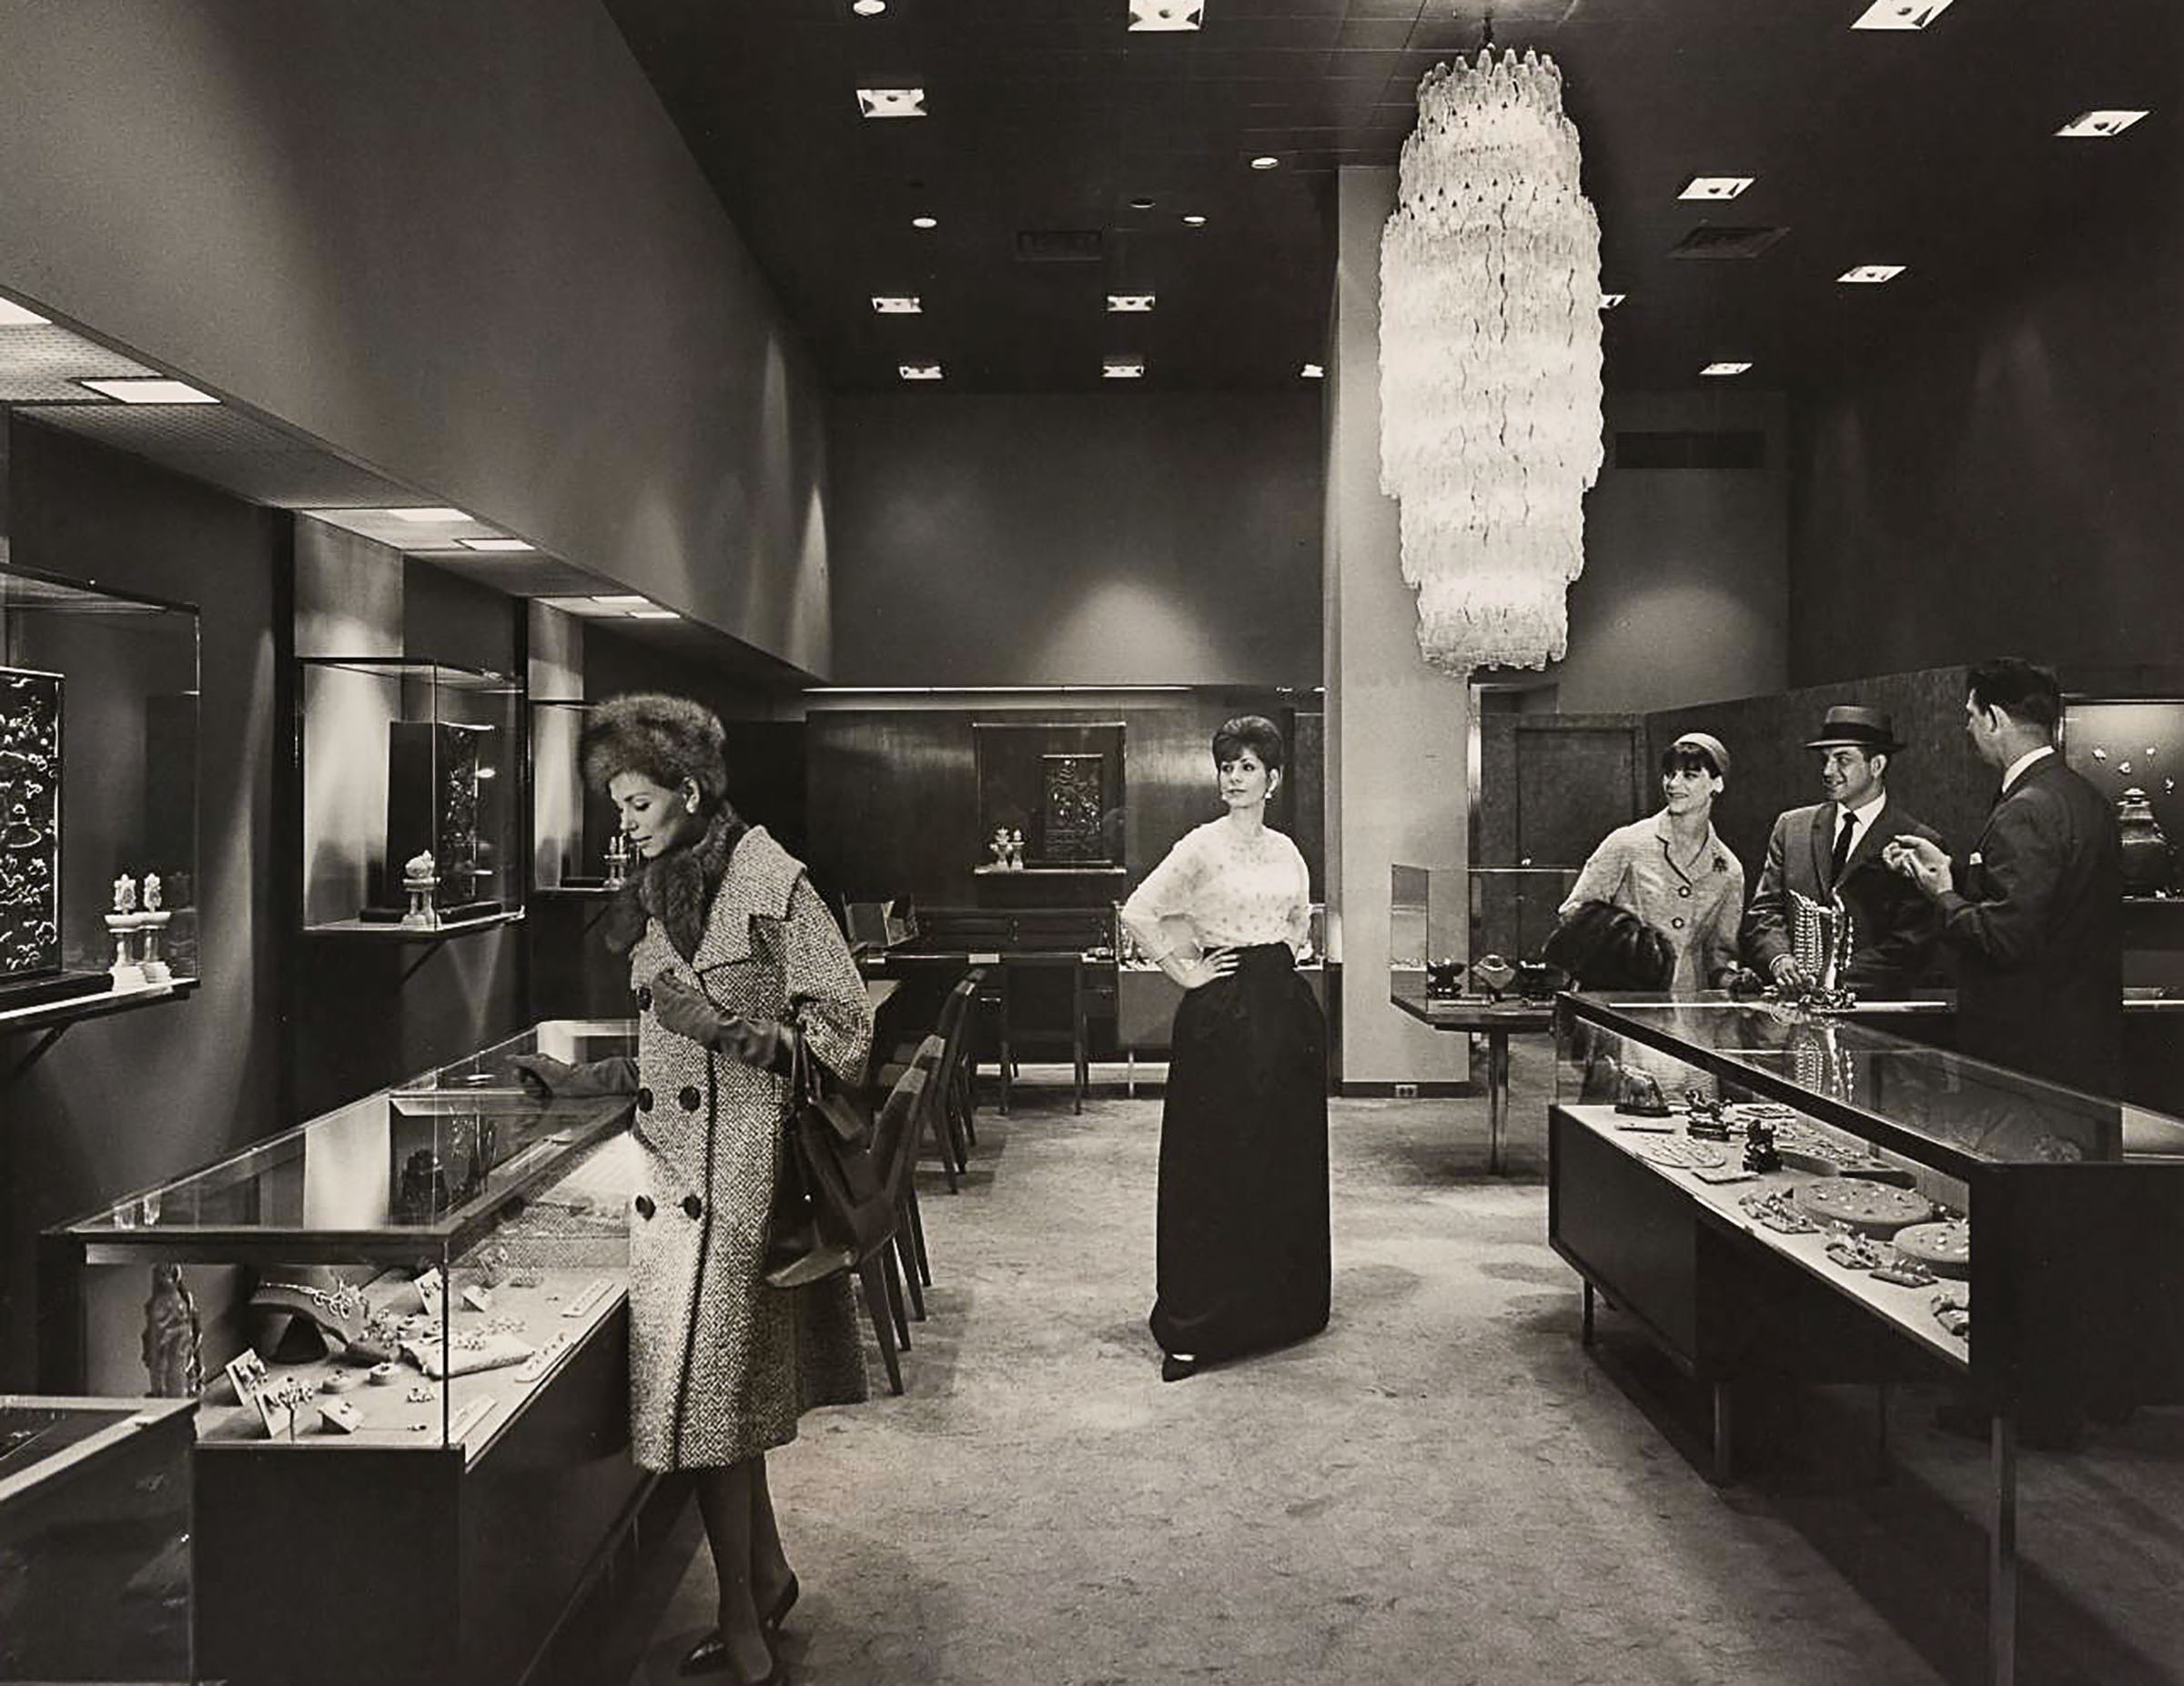 A woman looks at jewelry while others look on under a chandelier at Neiman Marcus